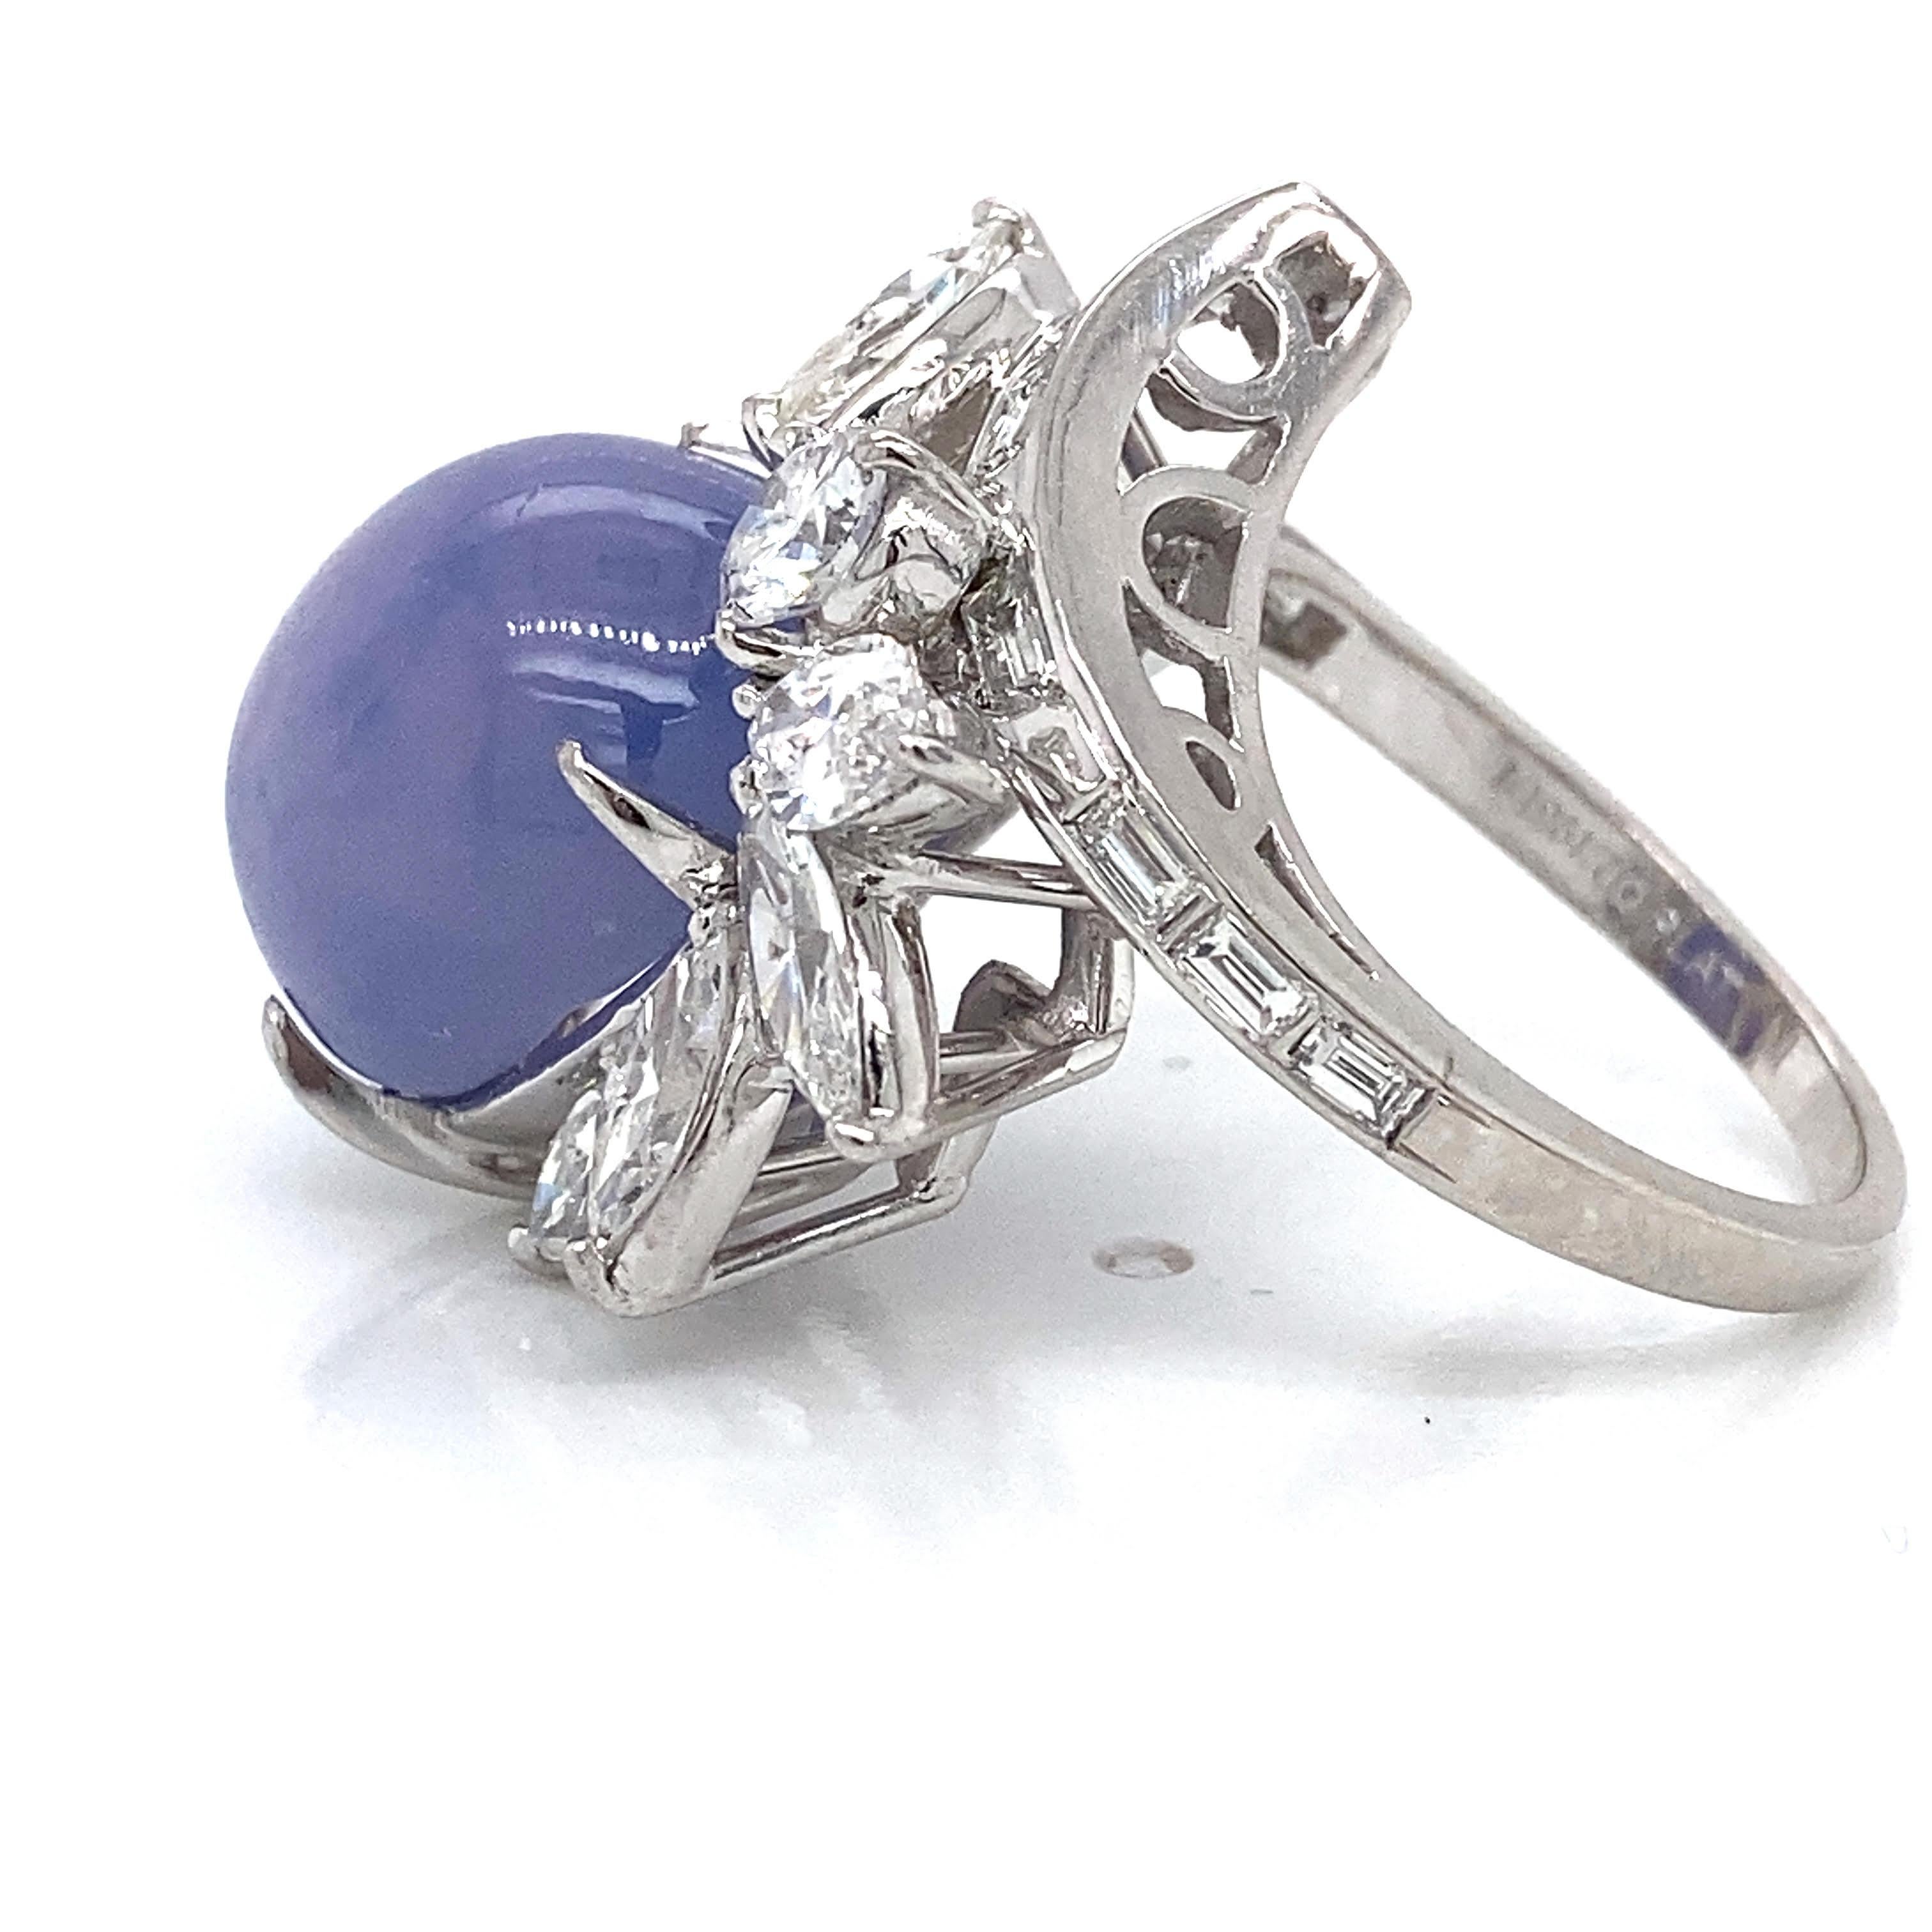 Lady's Platinum Ring 20.28Ct Cabochon Star Sapphire unheated 
And 2.00Tw Marquis & Baguette Diamonds 
GIA Certificate# 2225014165